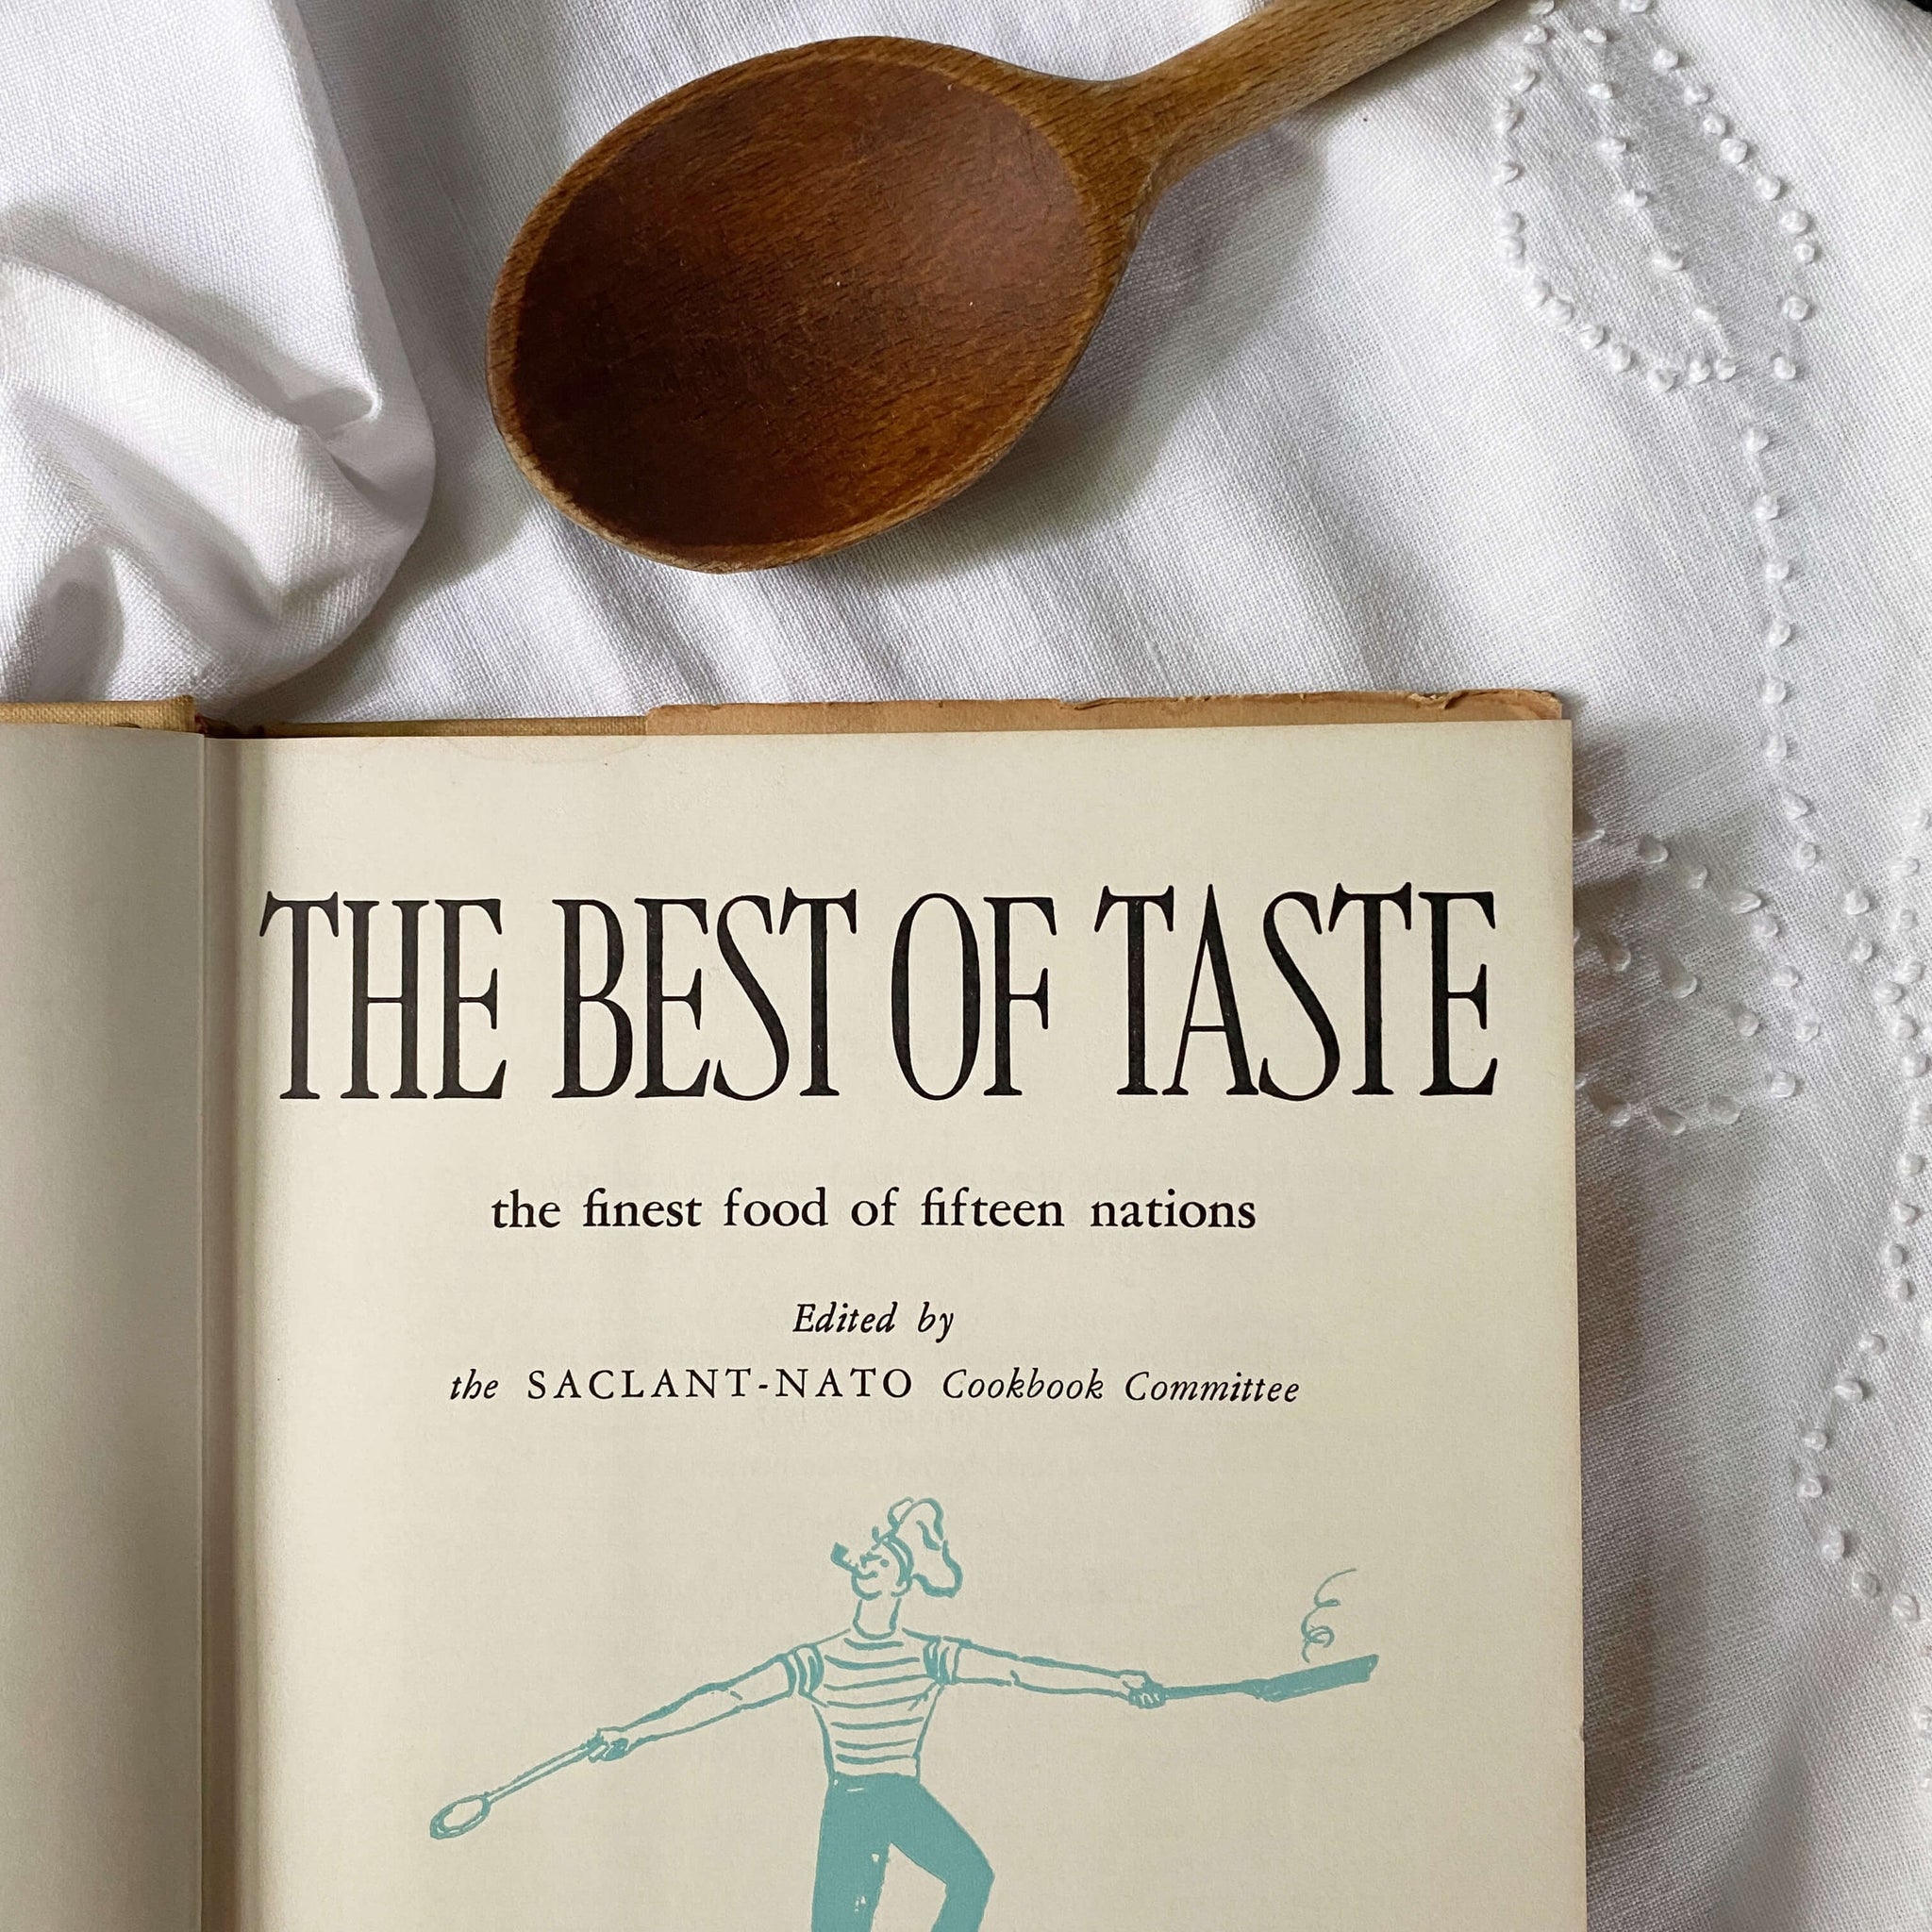 The Best of Taste by the Saclant-Nato Cookbook Committee - 1962 Edition, 3rd Printing